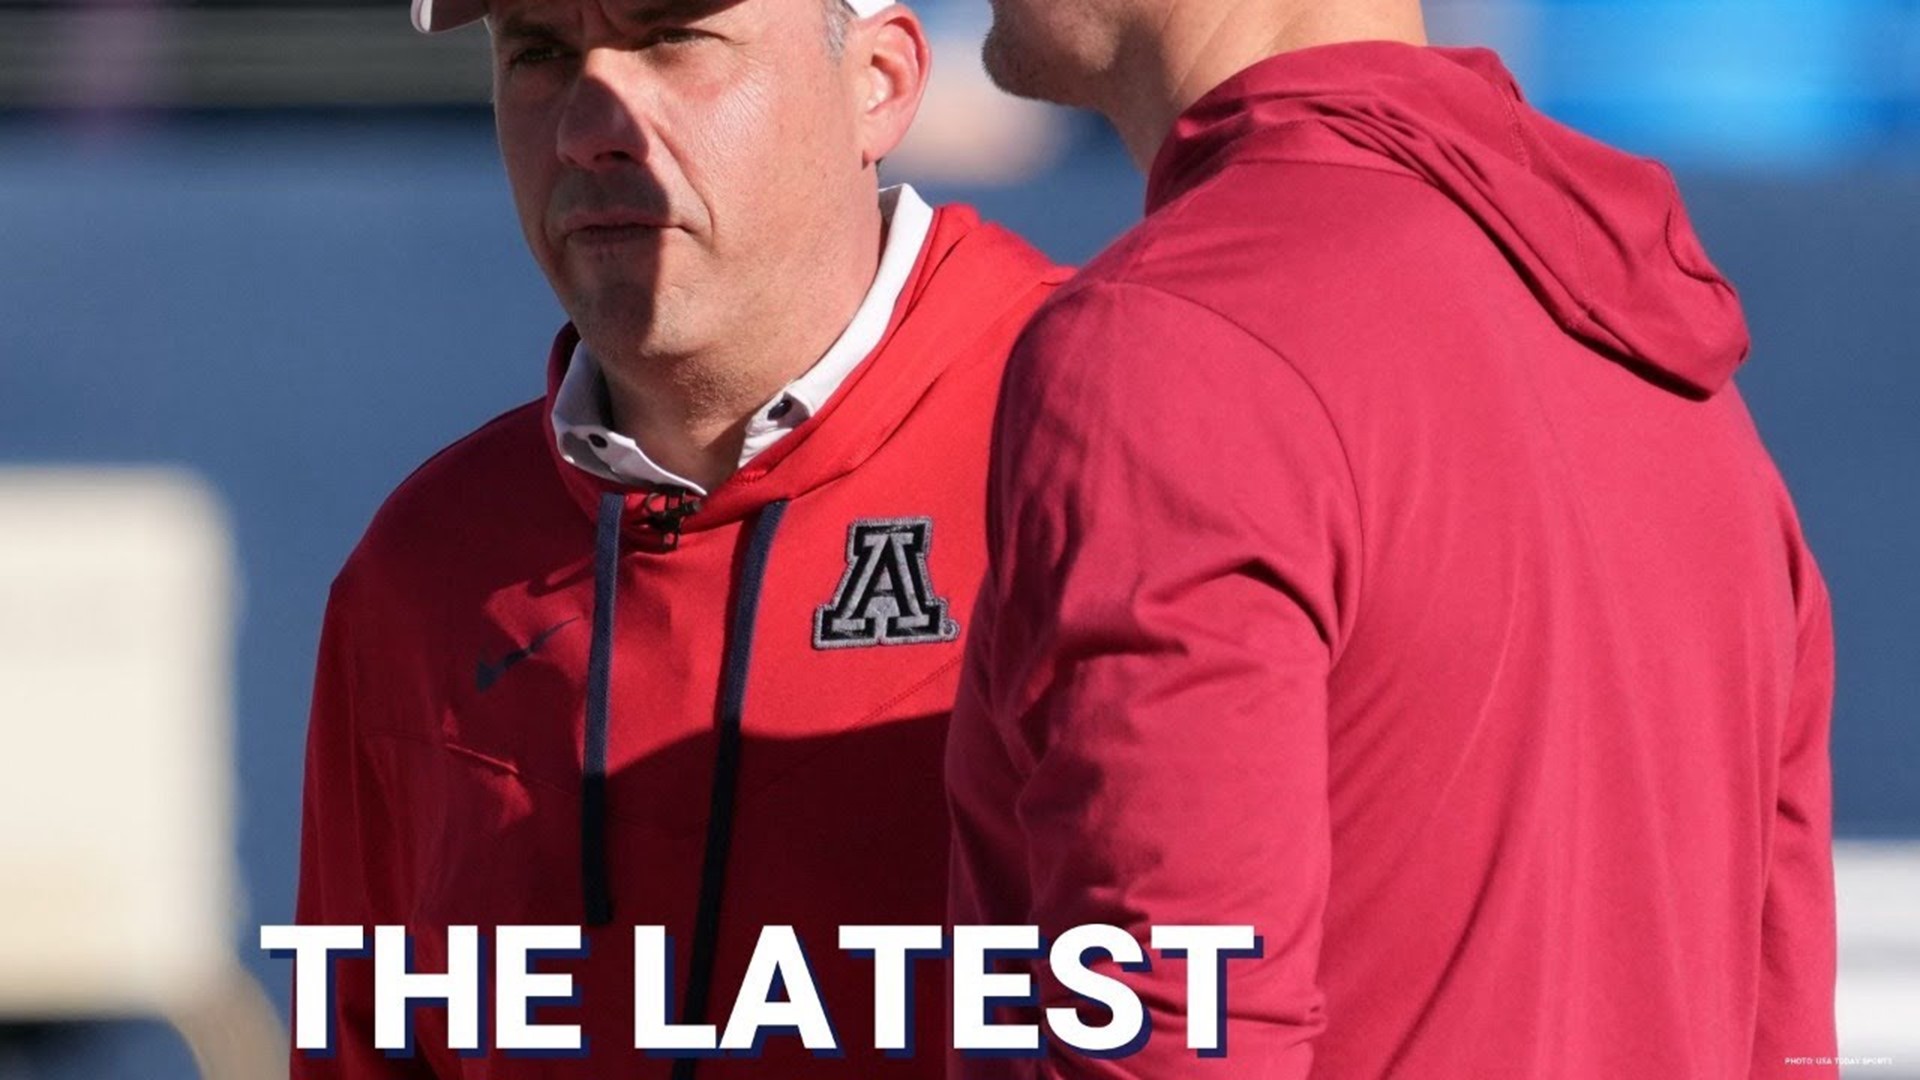 it's been a whirlwind week or so for Arizona football. The WIldcats have hosted many high-profile recruits.